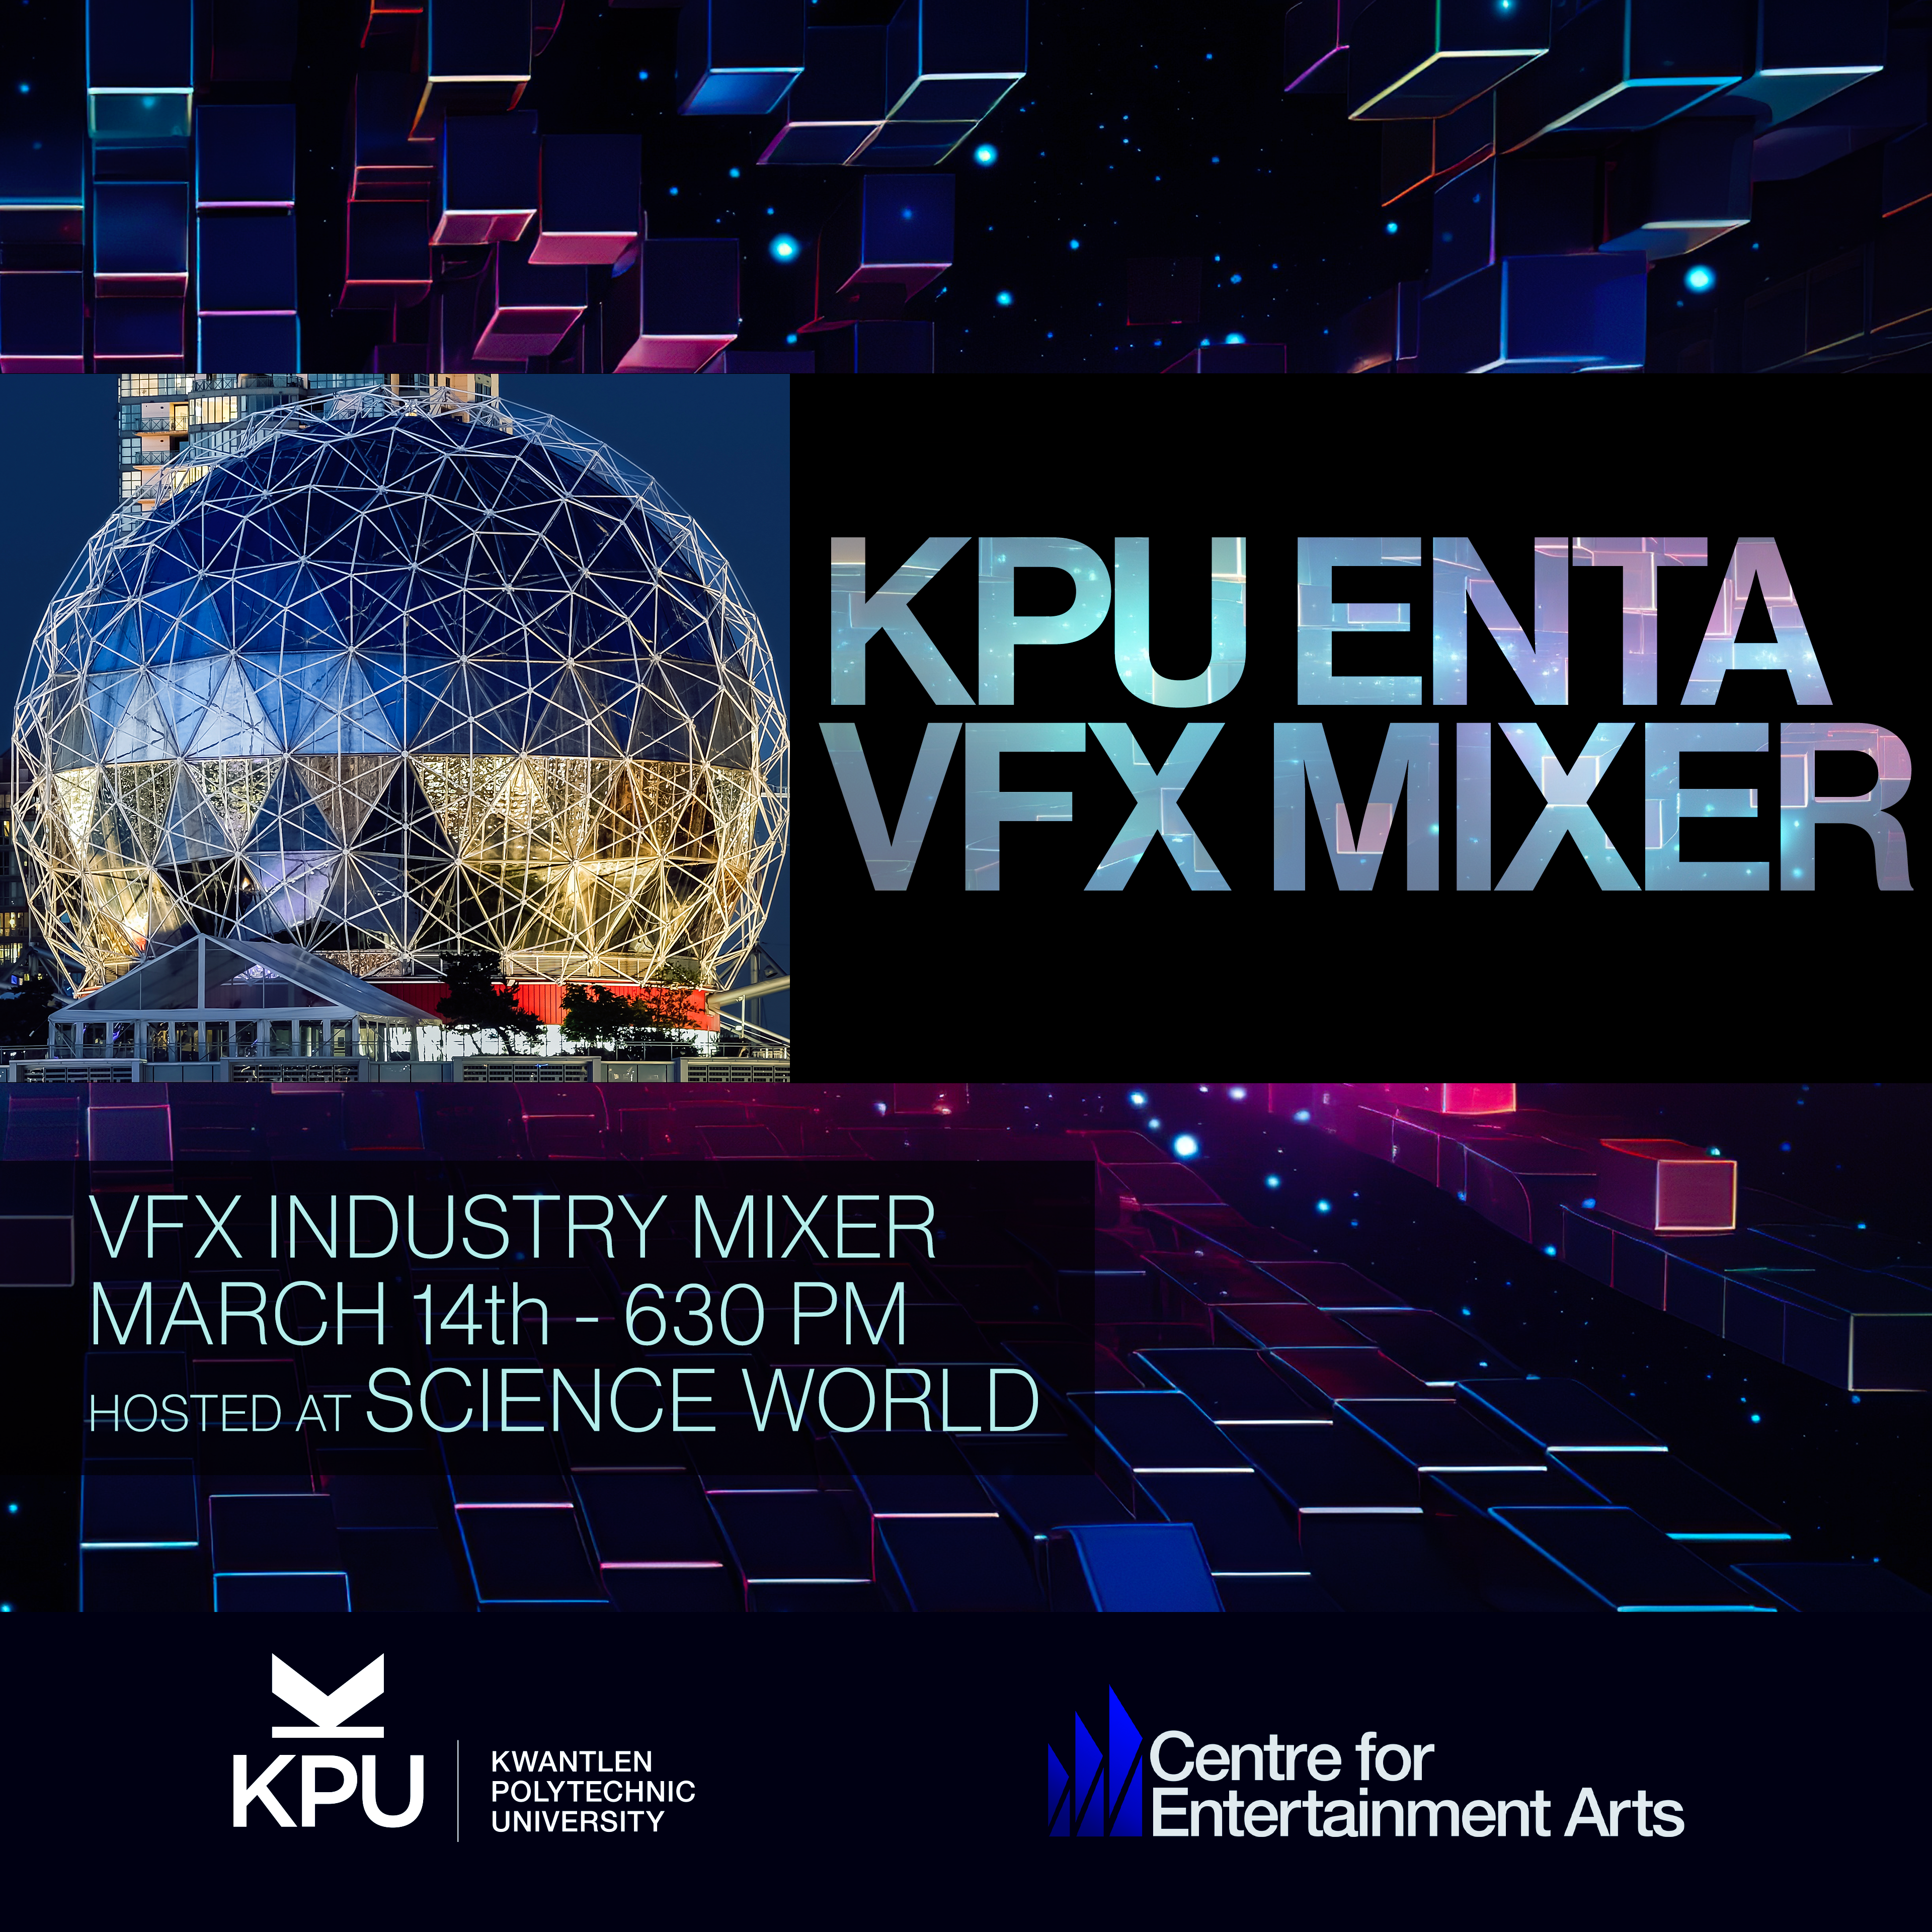 KPU ENTA VFX Industry Mixer. March 14th - 6:30 PM. Hosted at Science World.